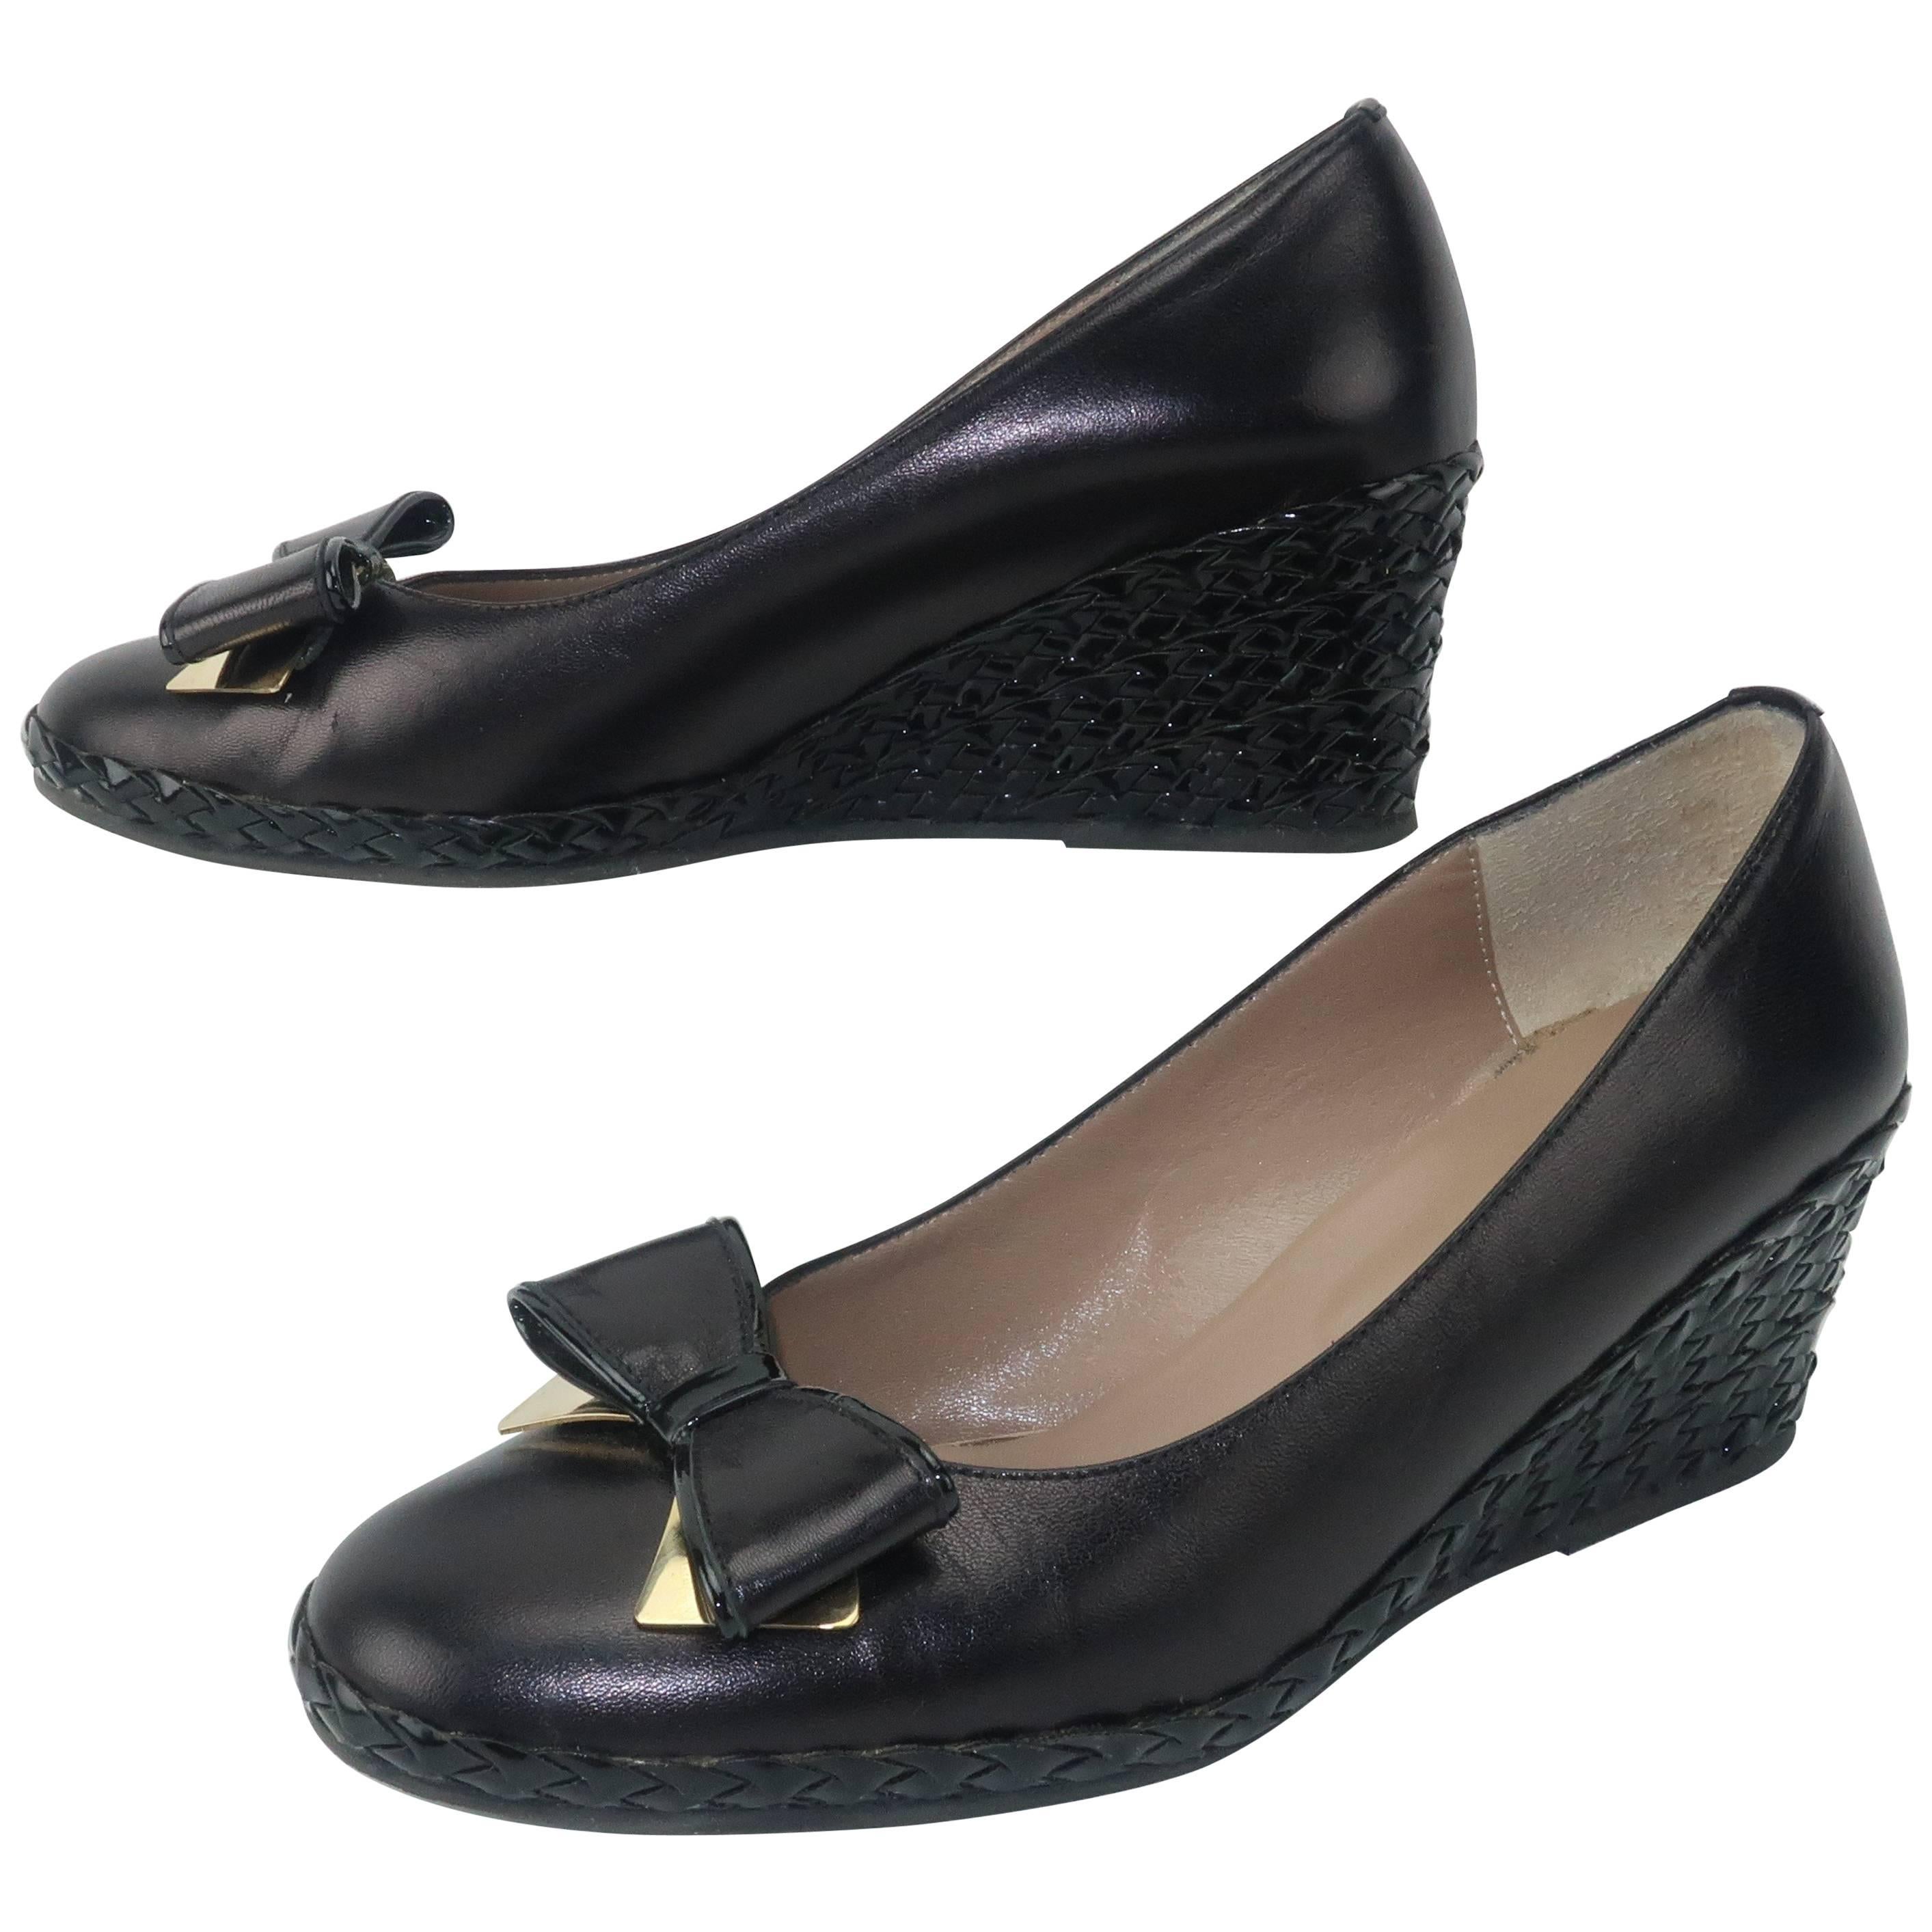 Bruno Magli Black Leather Wedge Shoes With Bow Tie Detail Sz 37